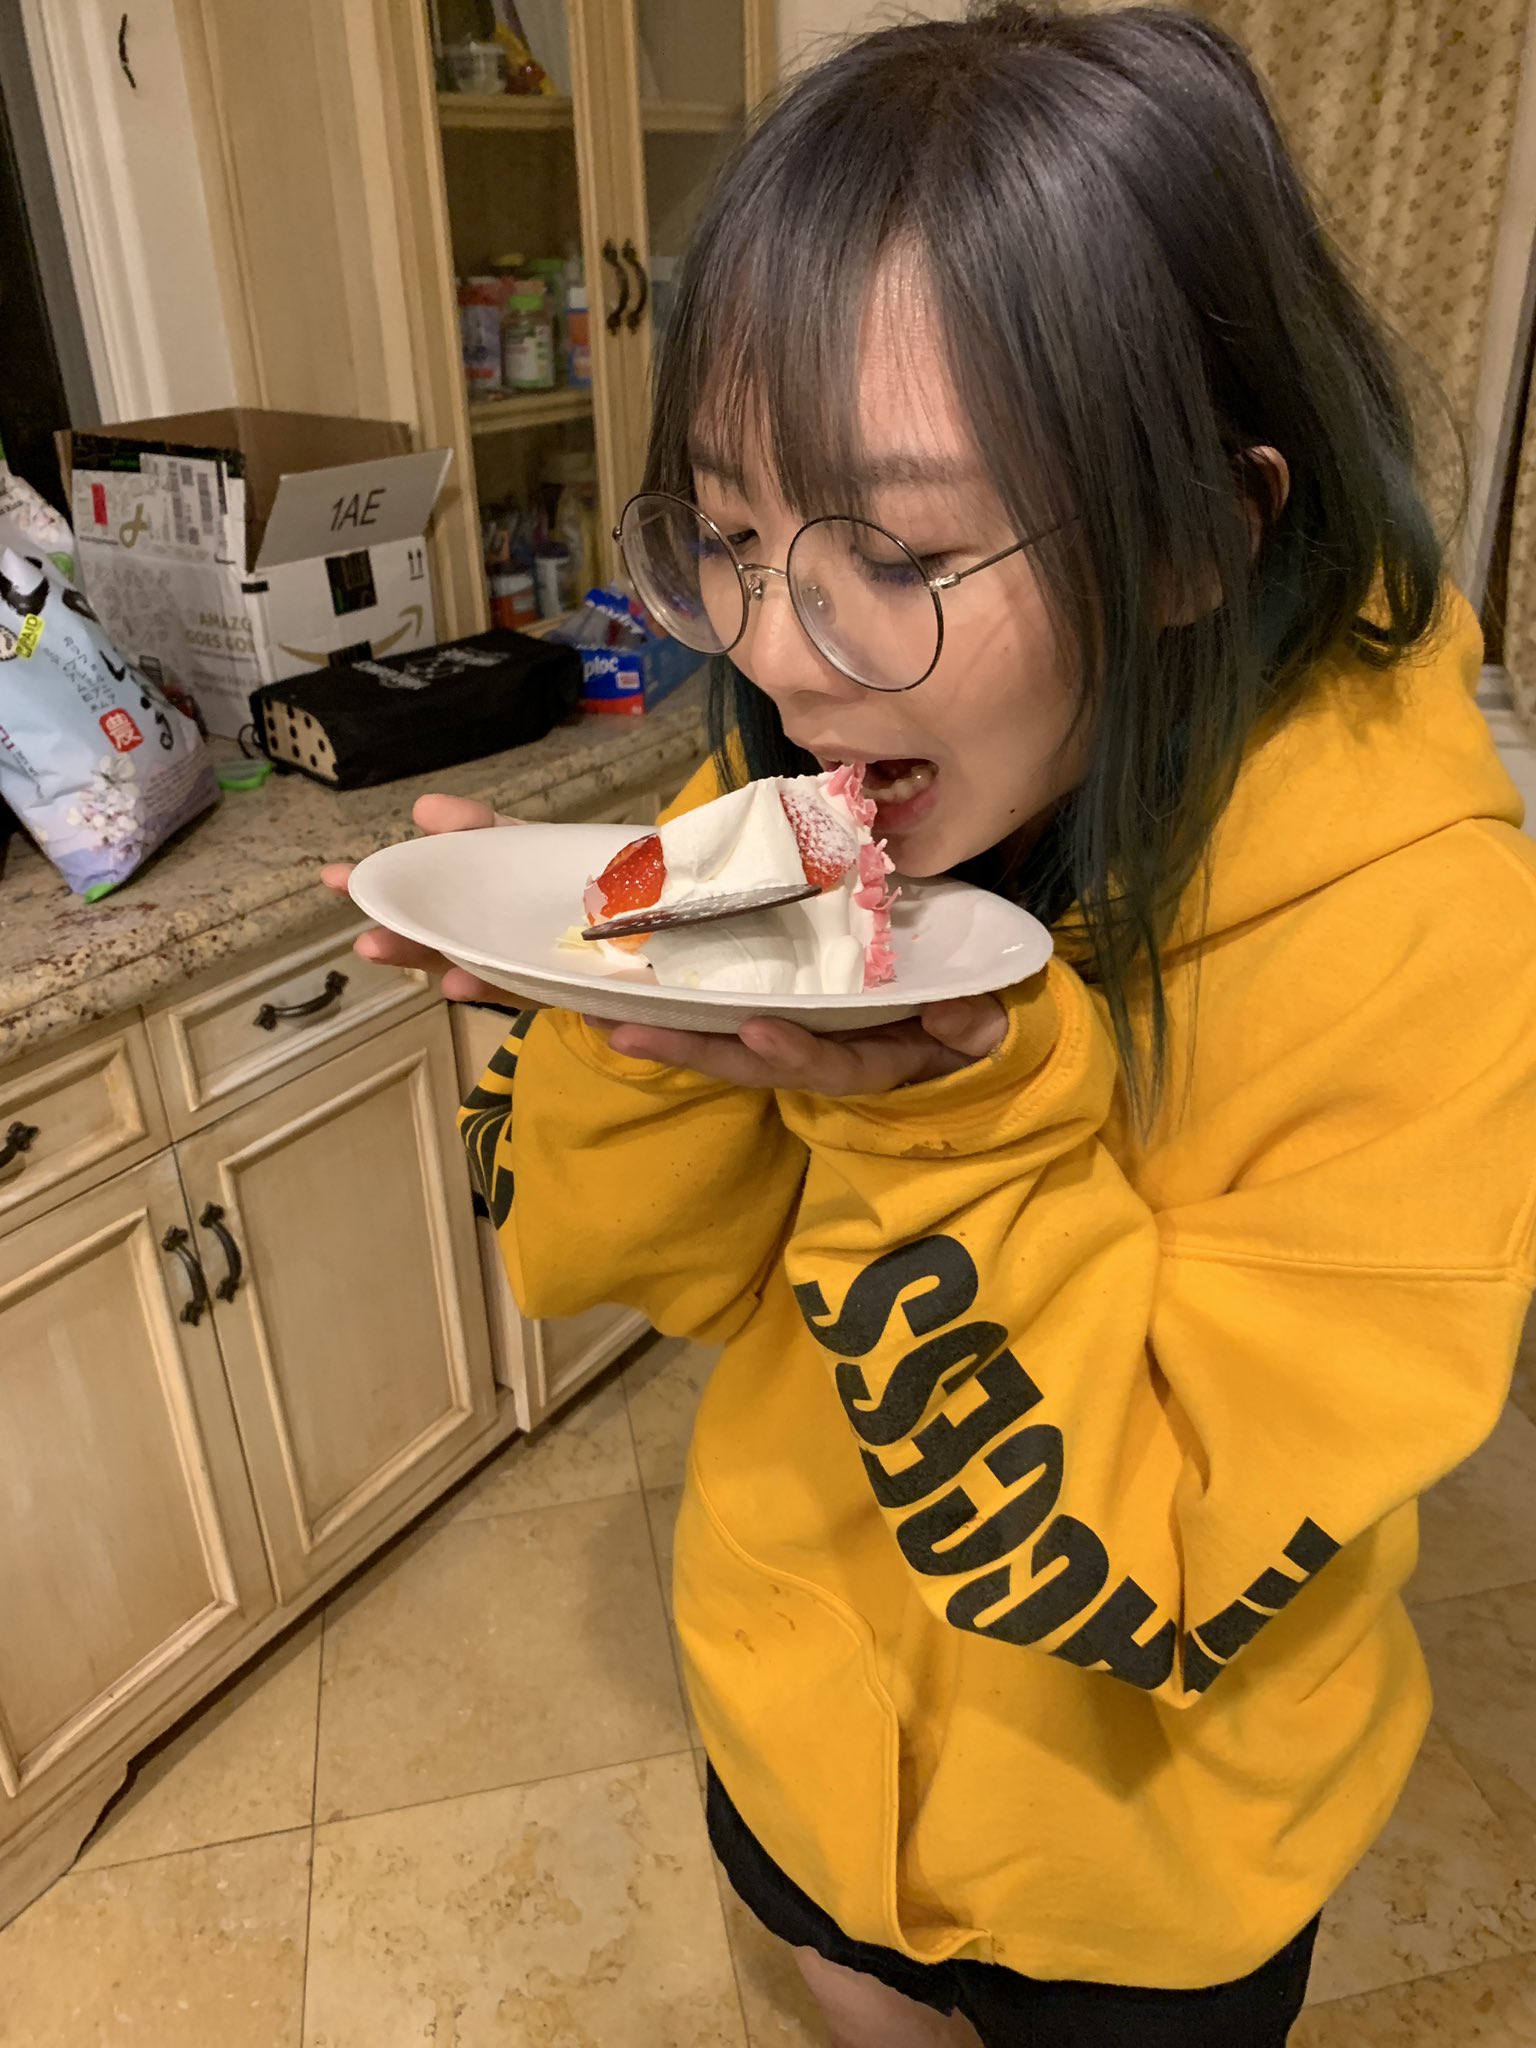 sugoi on Twitter: "@pokimanelol @LilyPichu https://t.co/zxevbP3Dwn&quo...